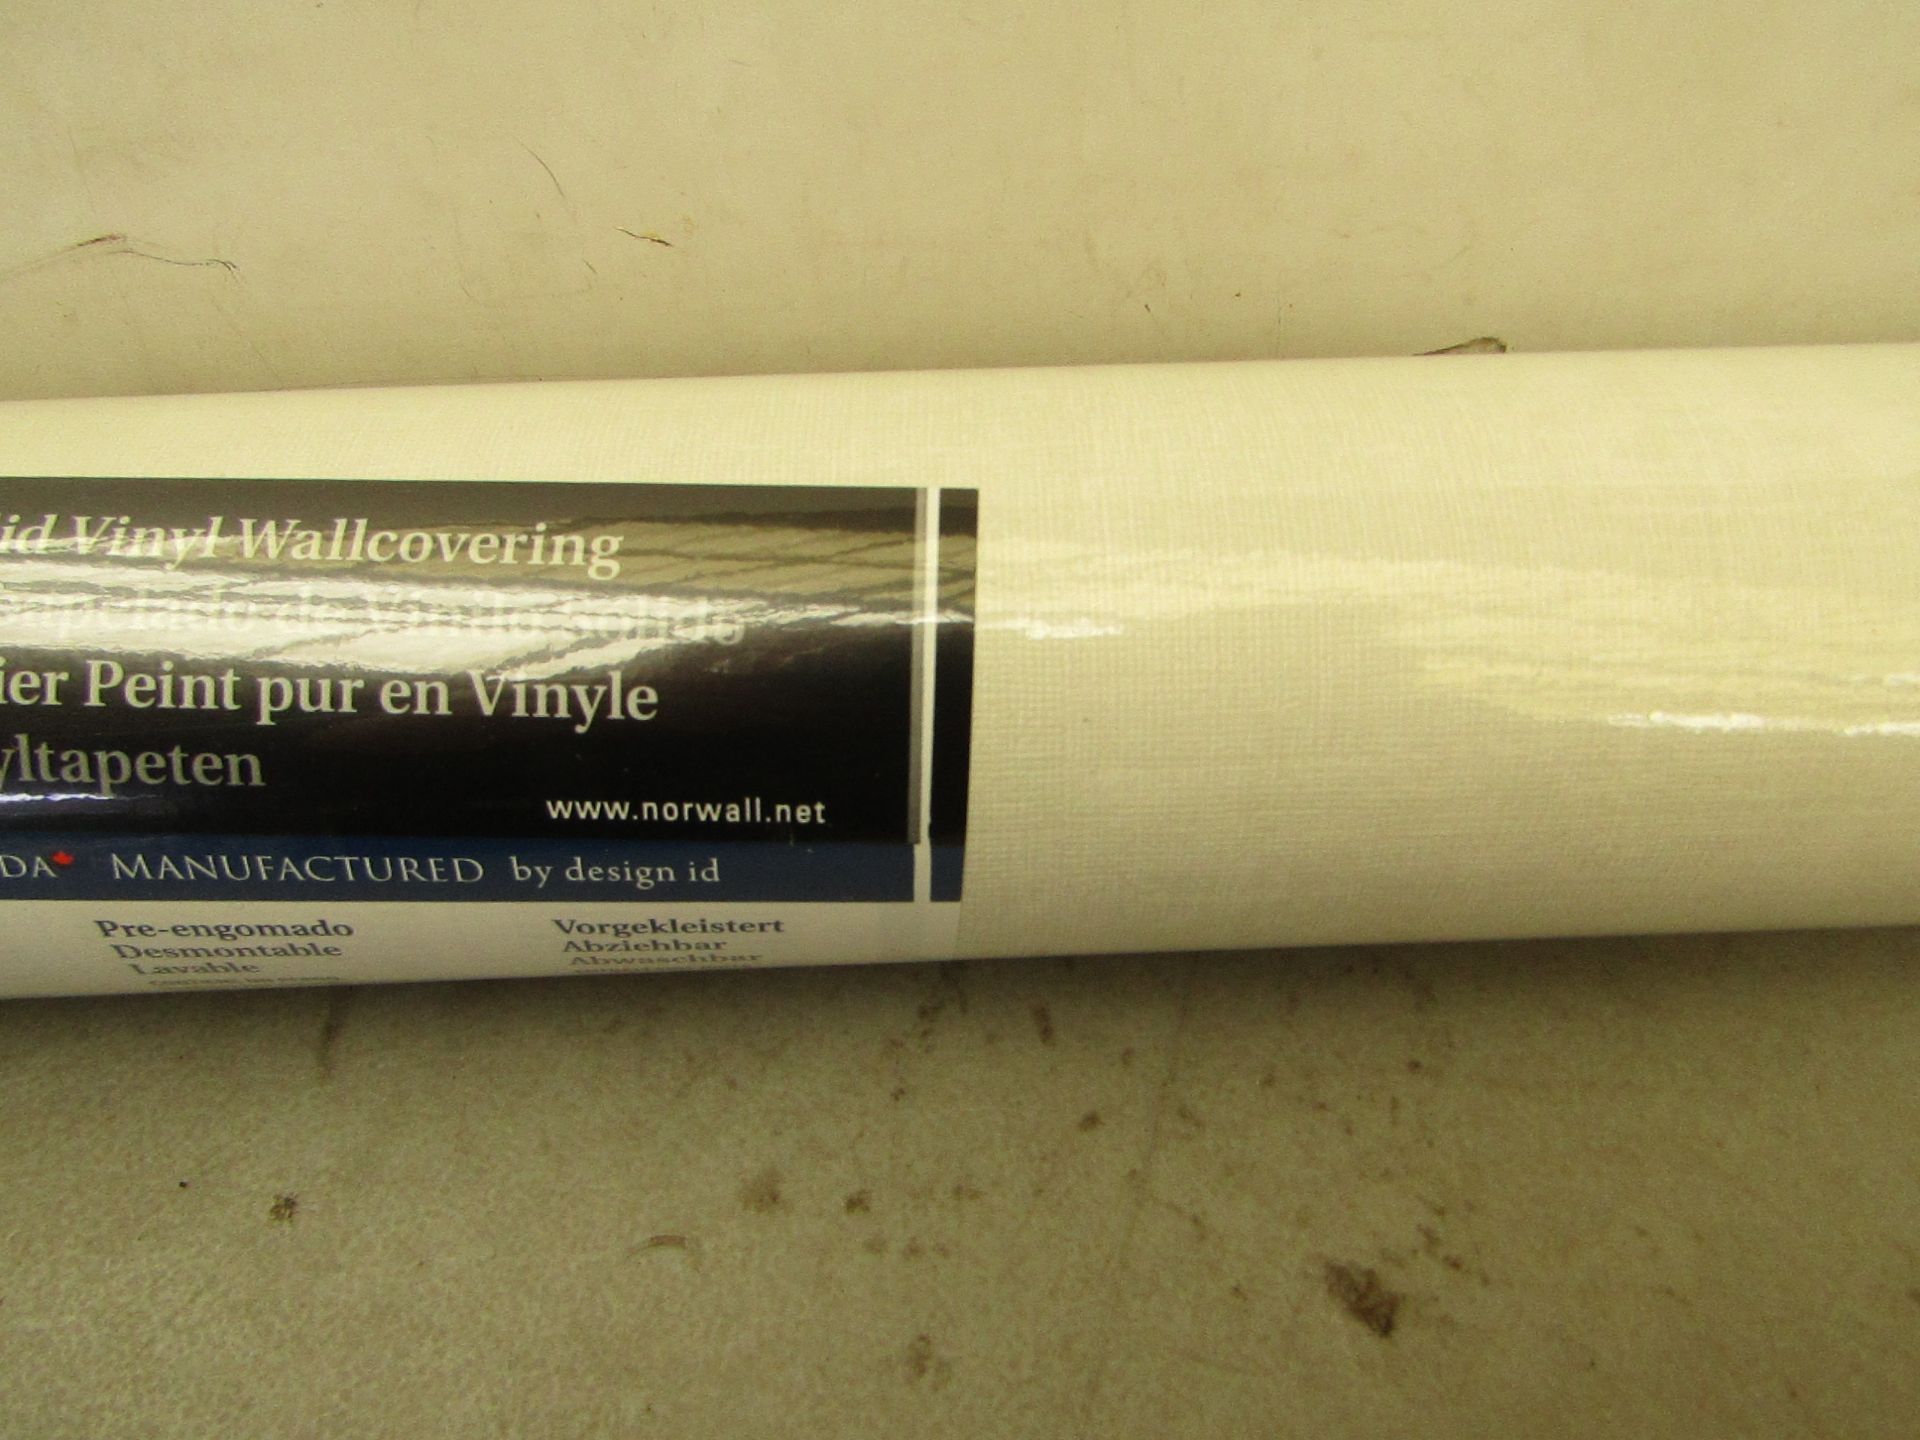 6 x Rolls of Norwall Pre pasted Wallpaper. Unused & Packaged. See Image for design